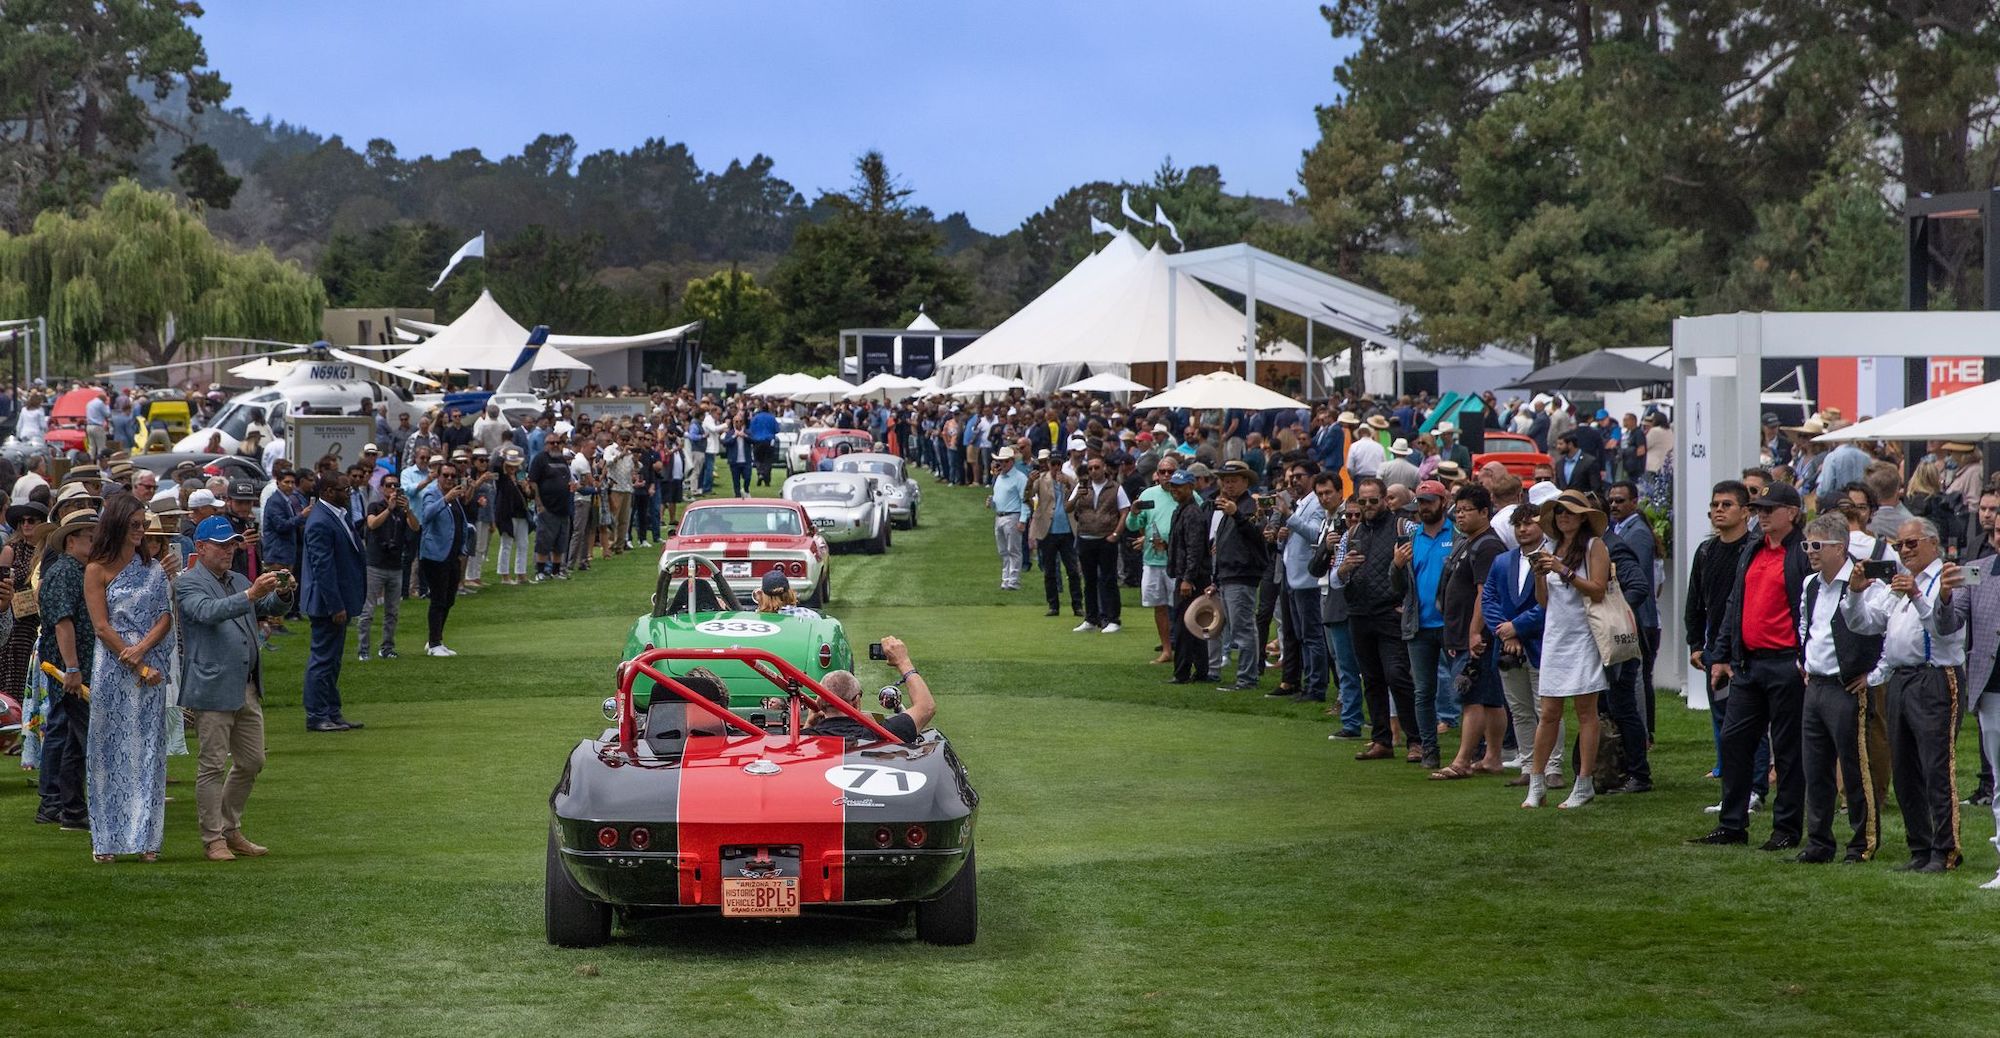 Coverage of the prestigious motorcar/motorsports event, The Quail. Media sourced from The Quail's relevant press release.